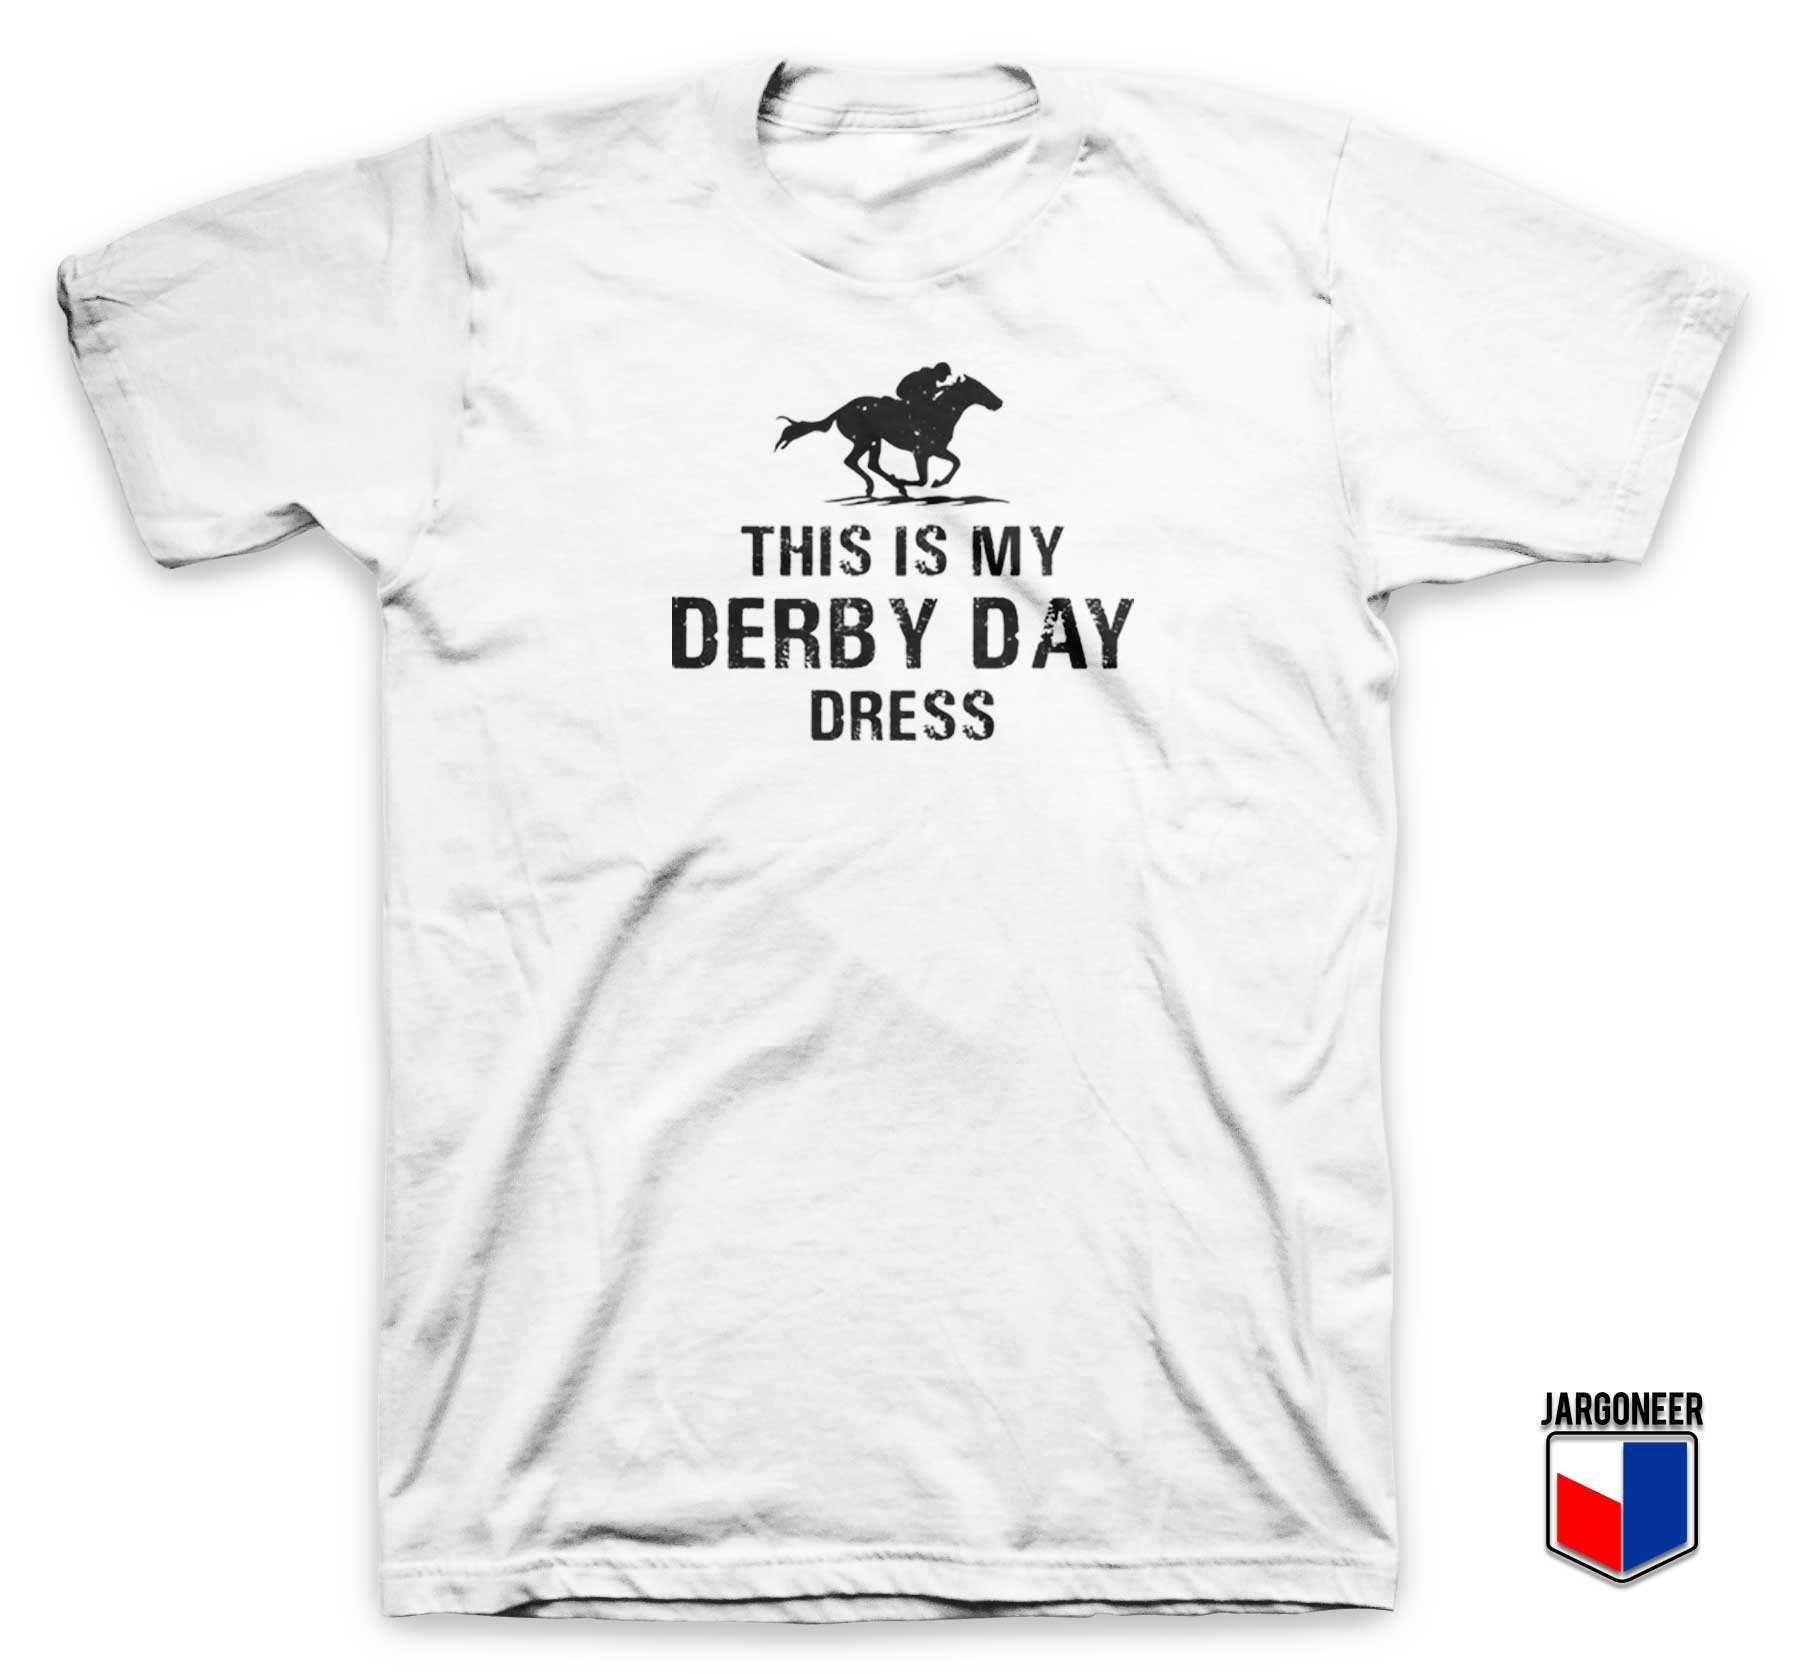 This Is My Derby Day Dress T Shirt - Shop Unique Graphic Cool Shirt Designs